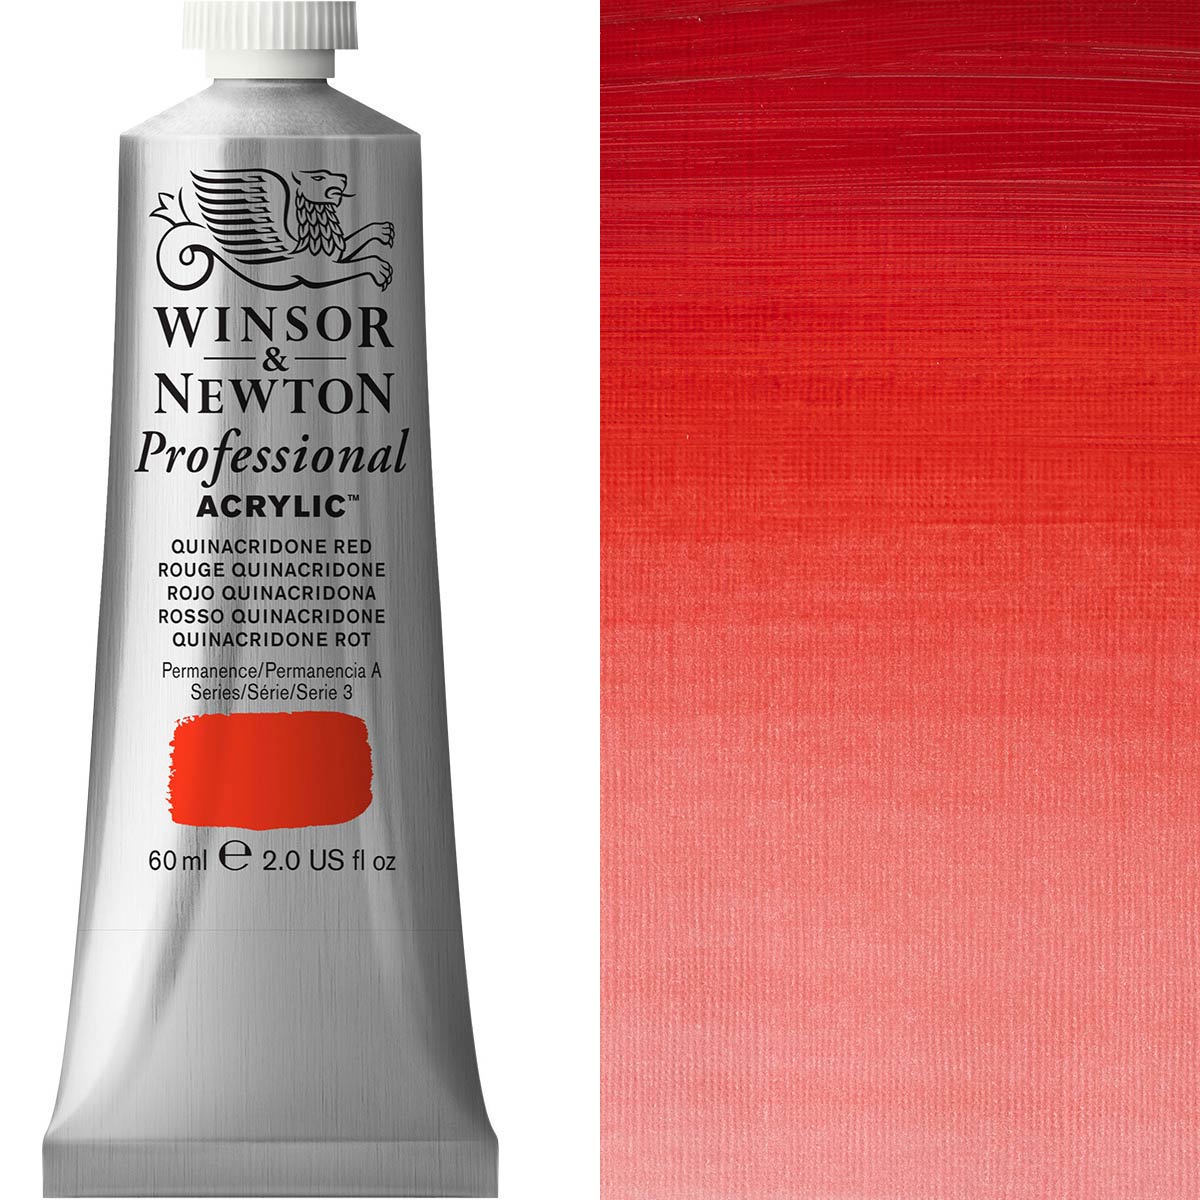 Winsor and Newton - Professional Artists' Acrylic Colour - 60ml - Quinacridone Red